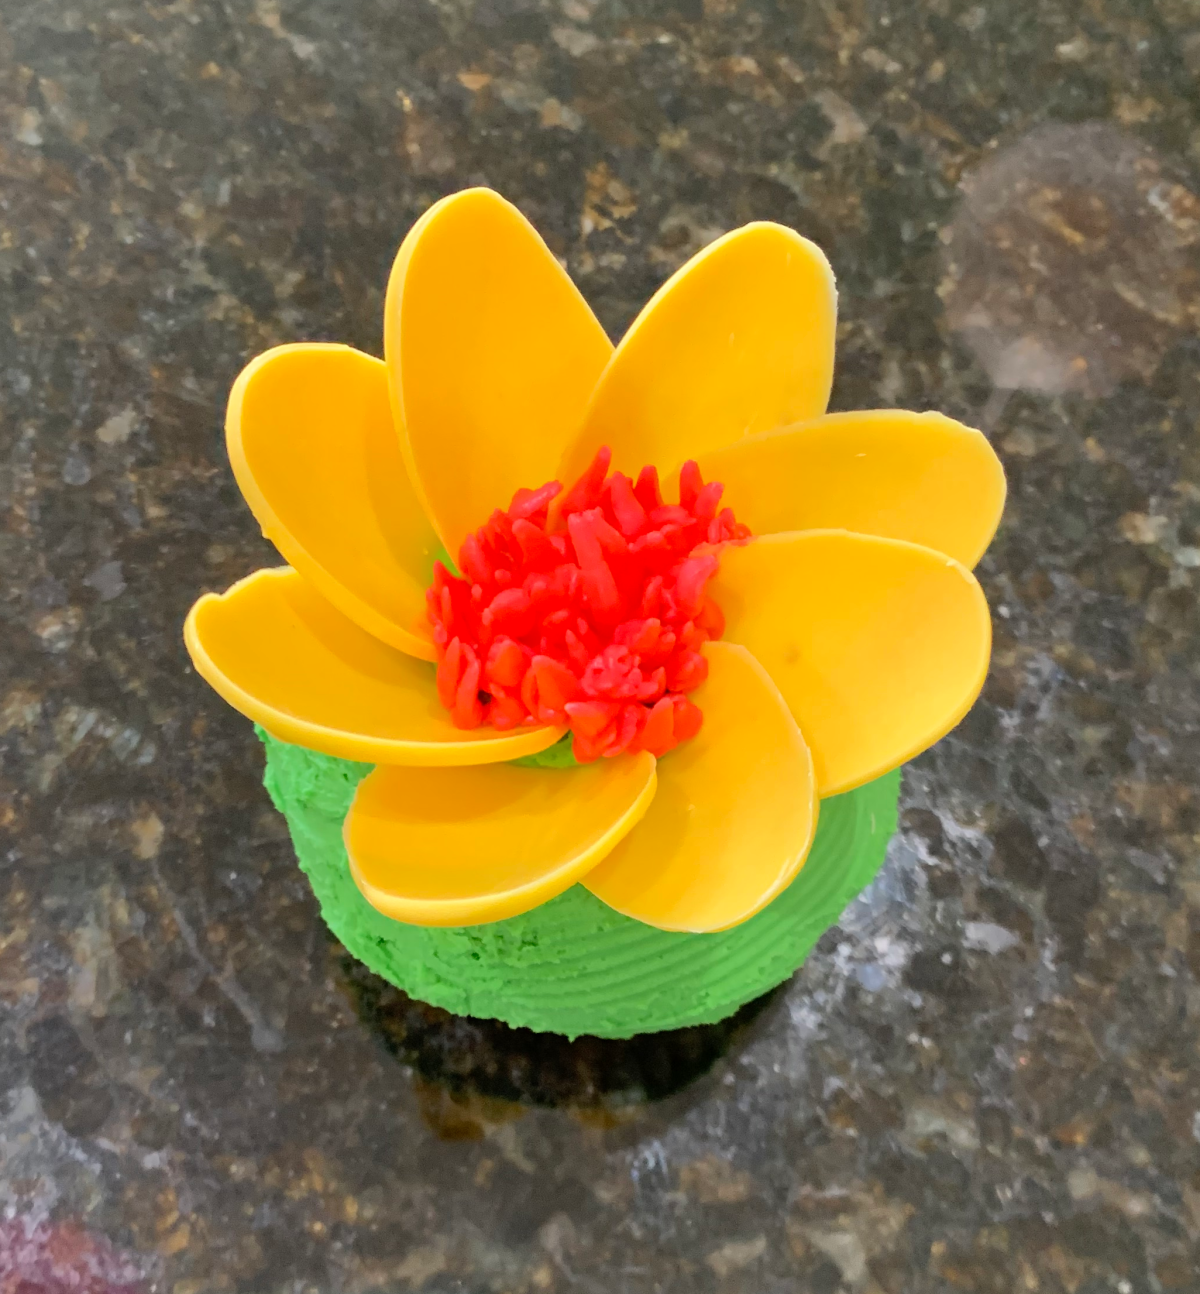 A photo of a cupcake decorated with a yellow flower.